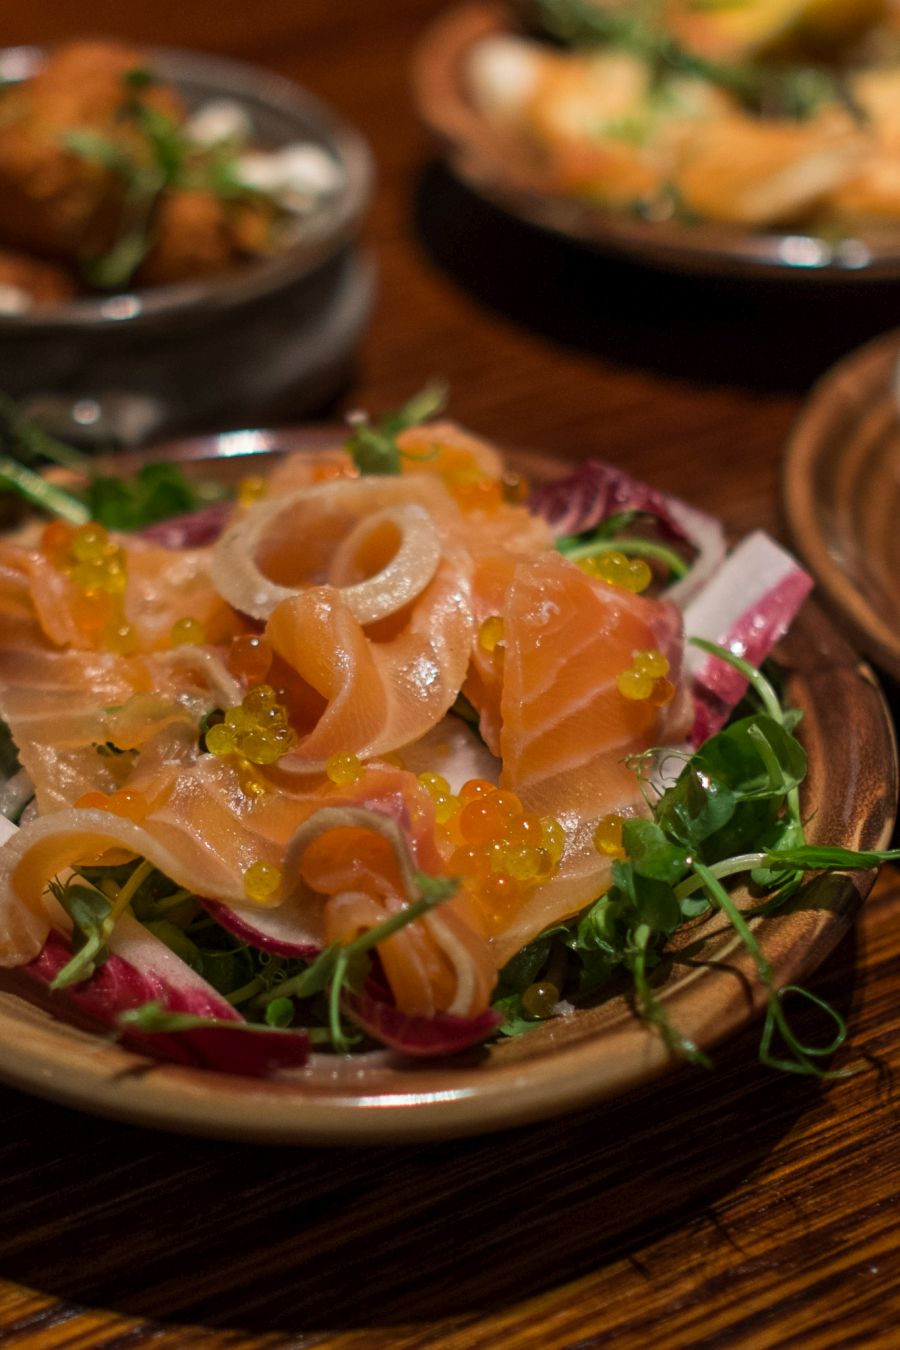 House-smoked apple and whisky cured salmon (AU$16, gluten-free)